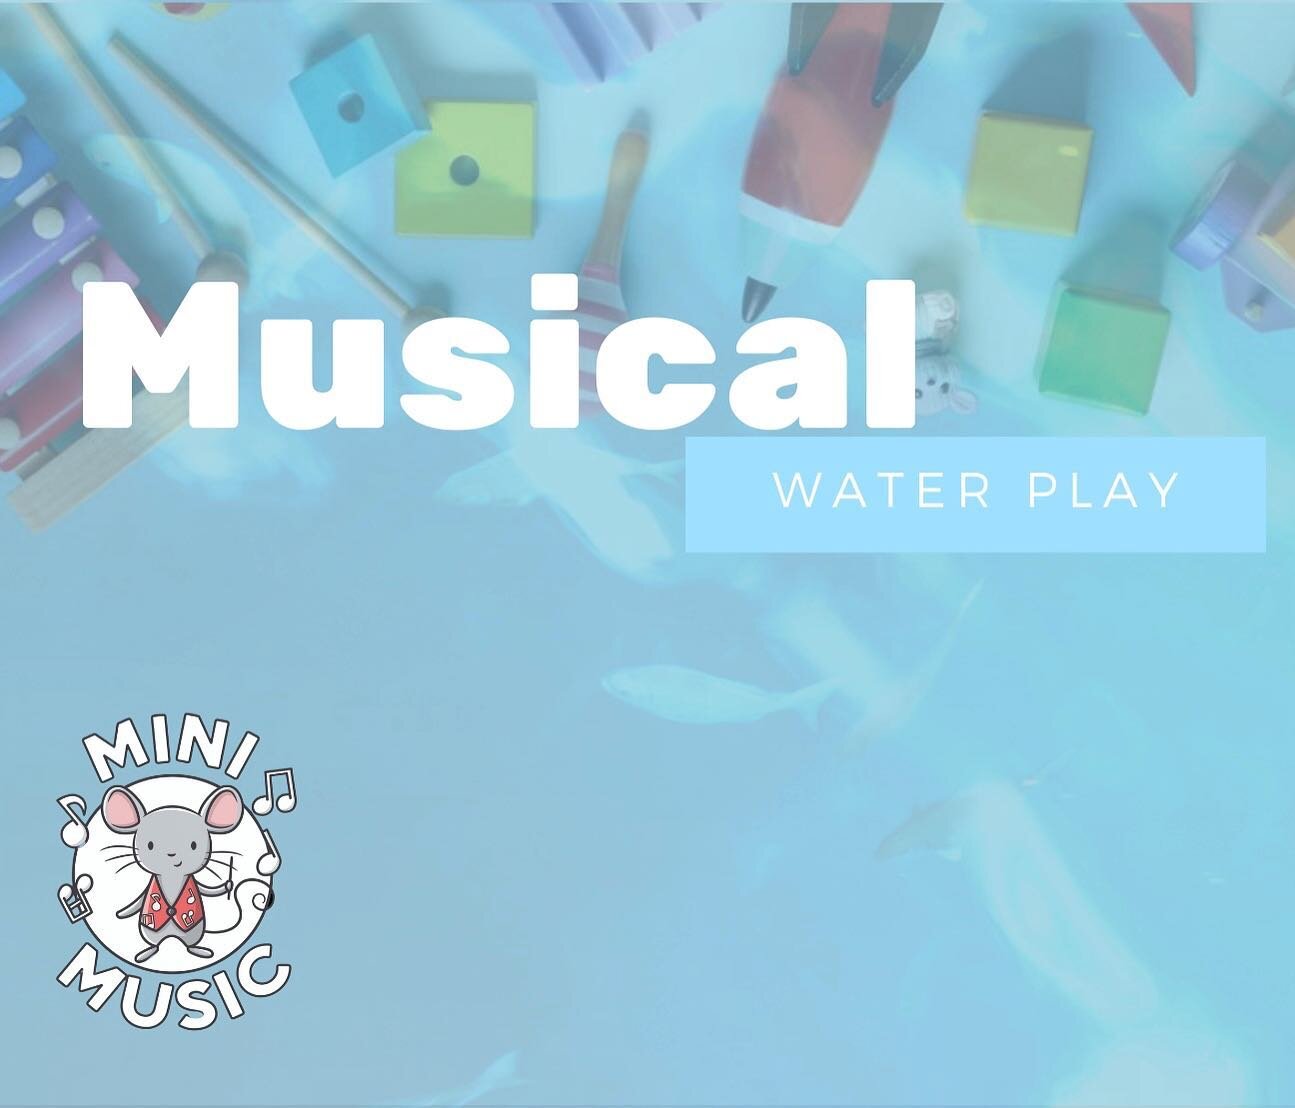 💦Musical Water Play💦

Using different household items you can explore music, pitch and tonal changes through water play!

I have put together some fun musical play ideas that will keep the kiddies cool too! All you need is a paddling pool or basin 